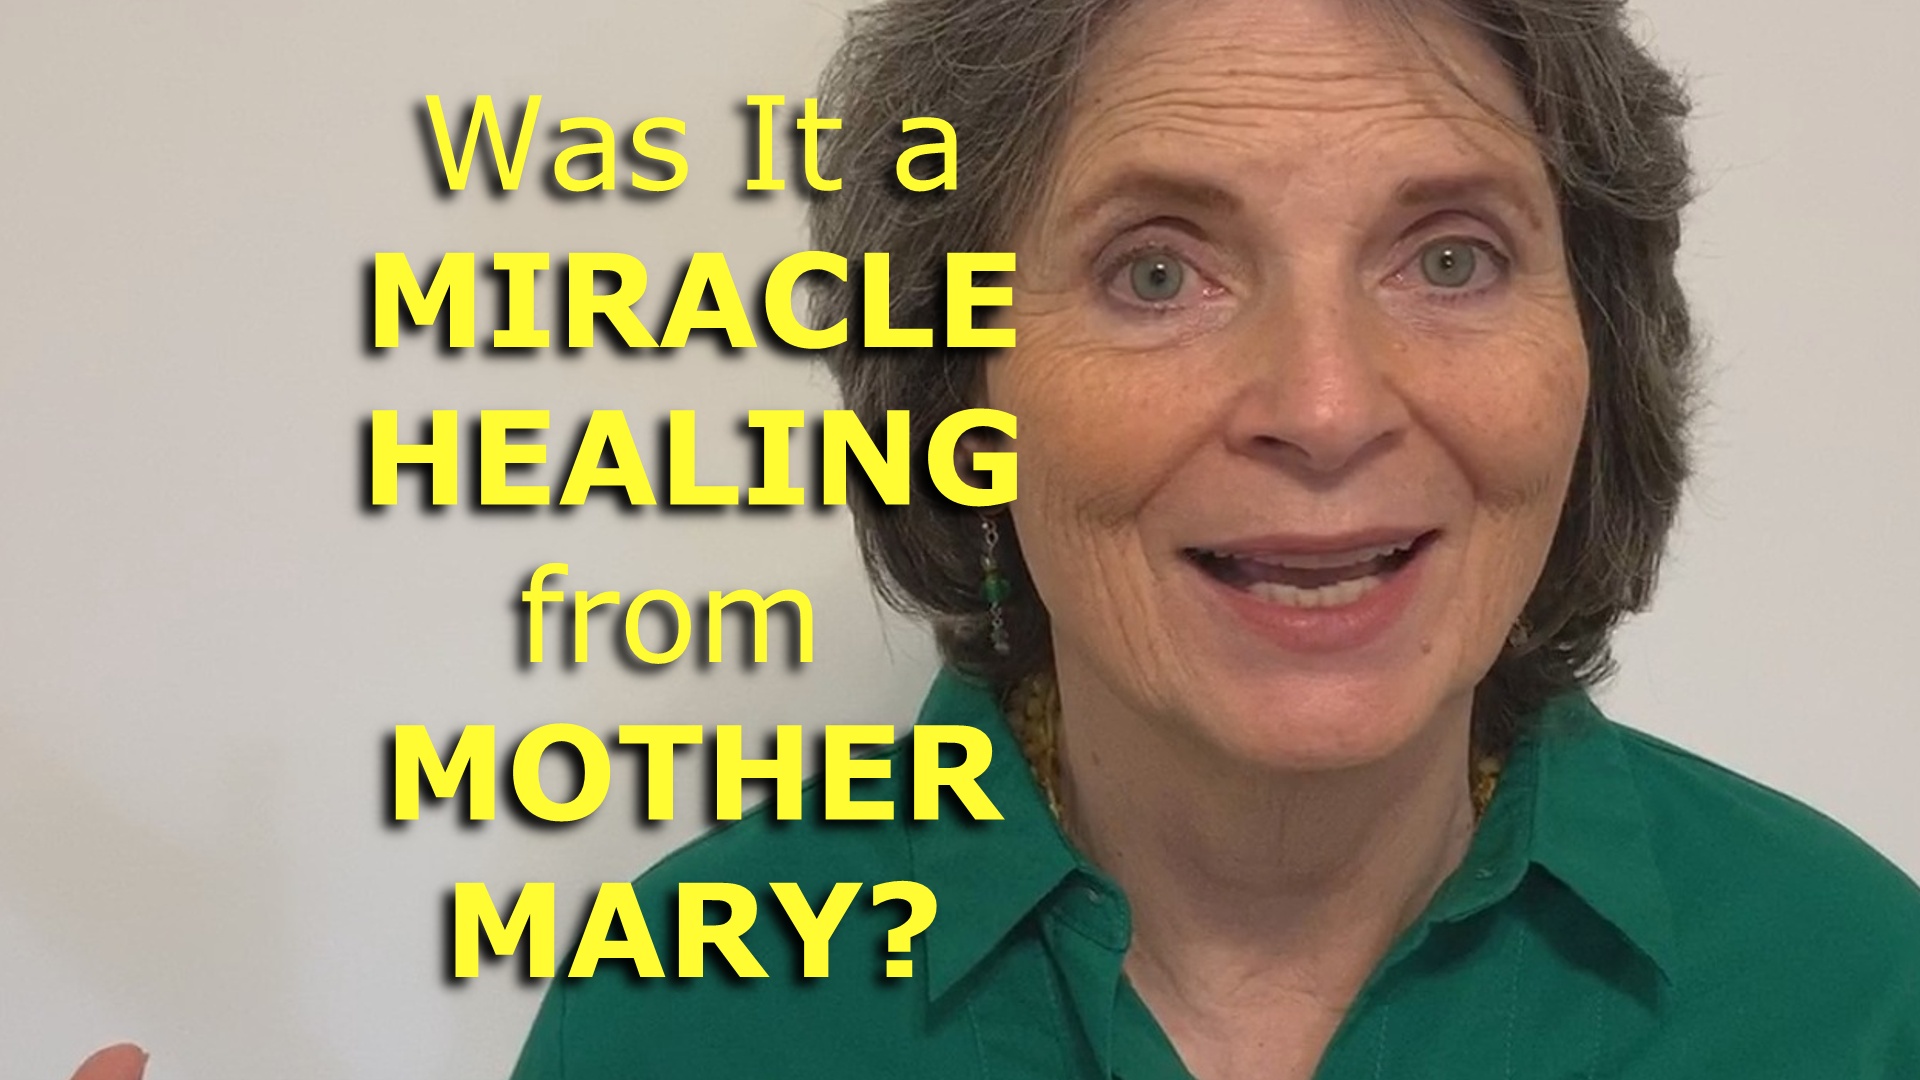 Was It a Miraculous Healing from Mother Mary